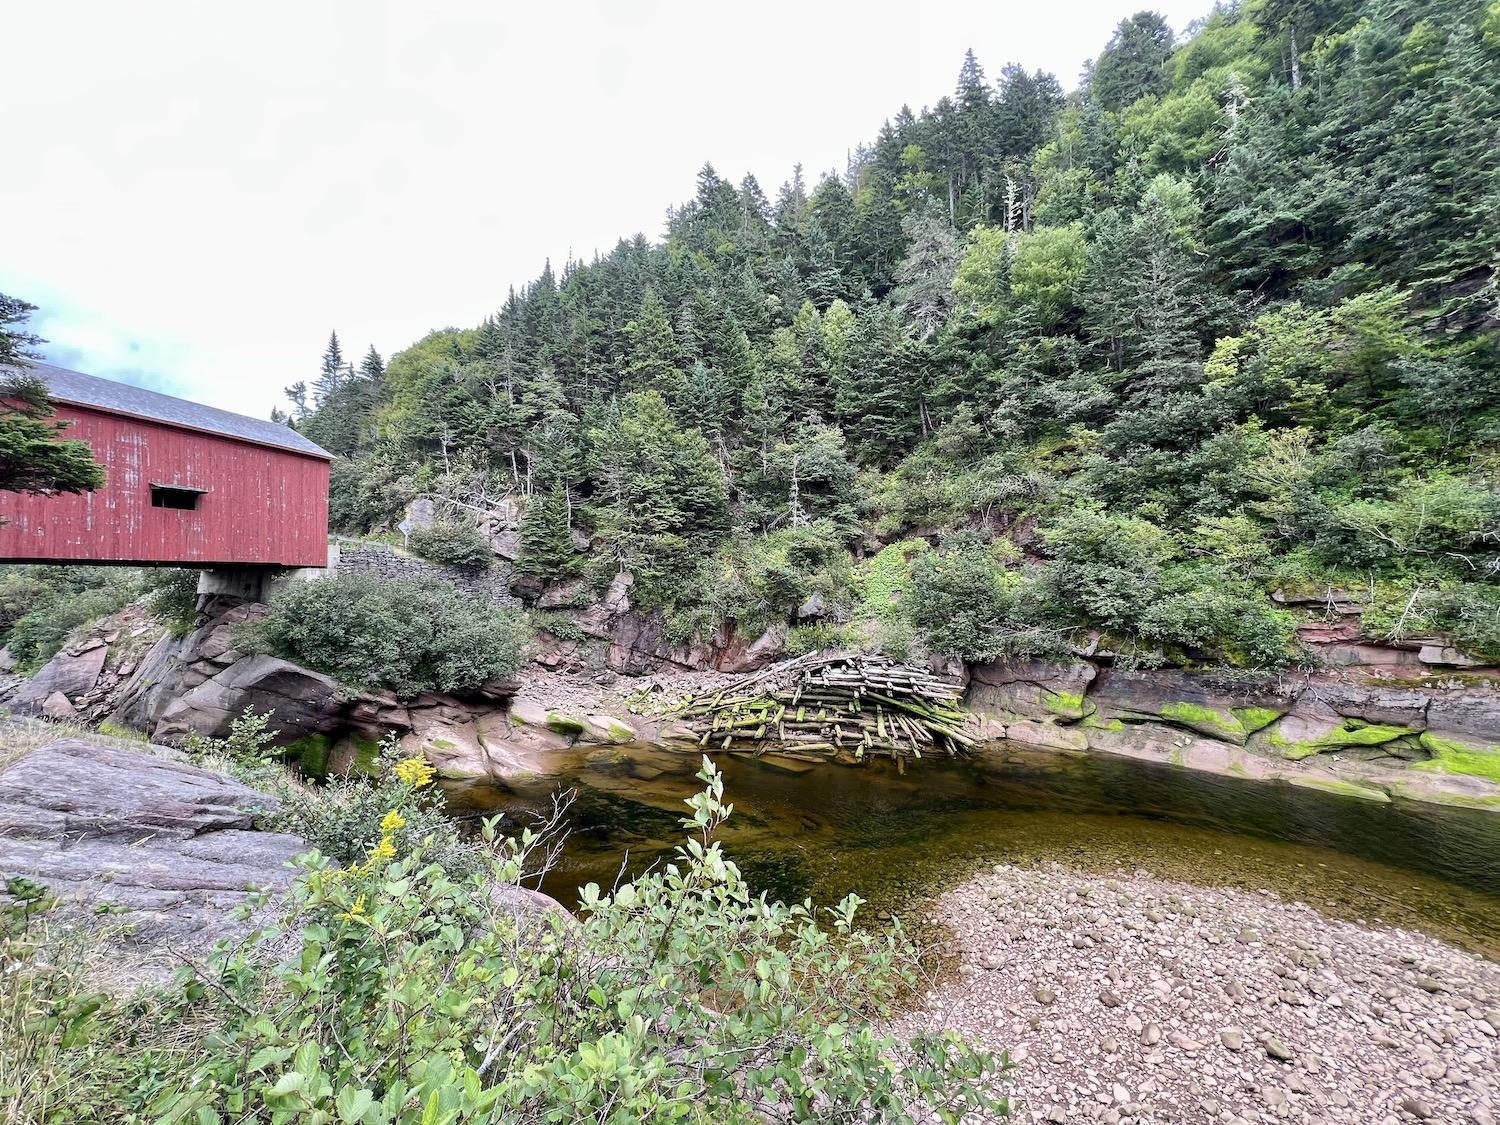 The most photographed thing in Fundy National Park is this covered bridge.